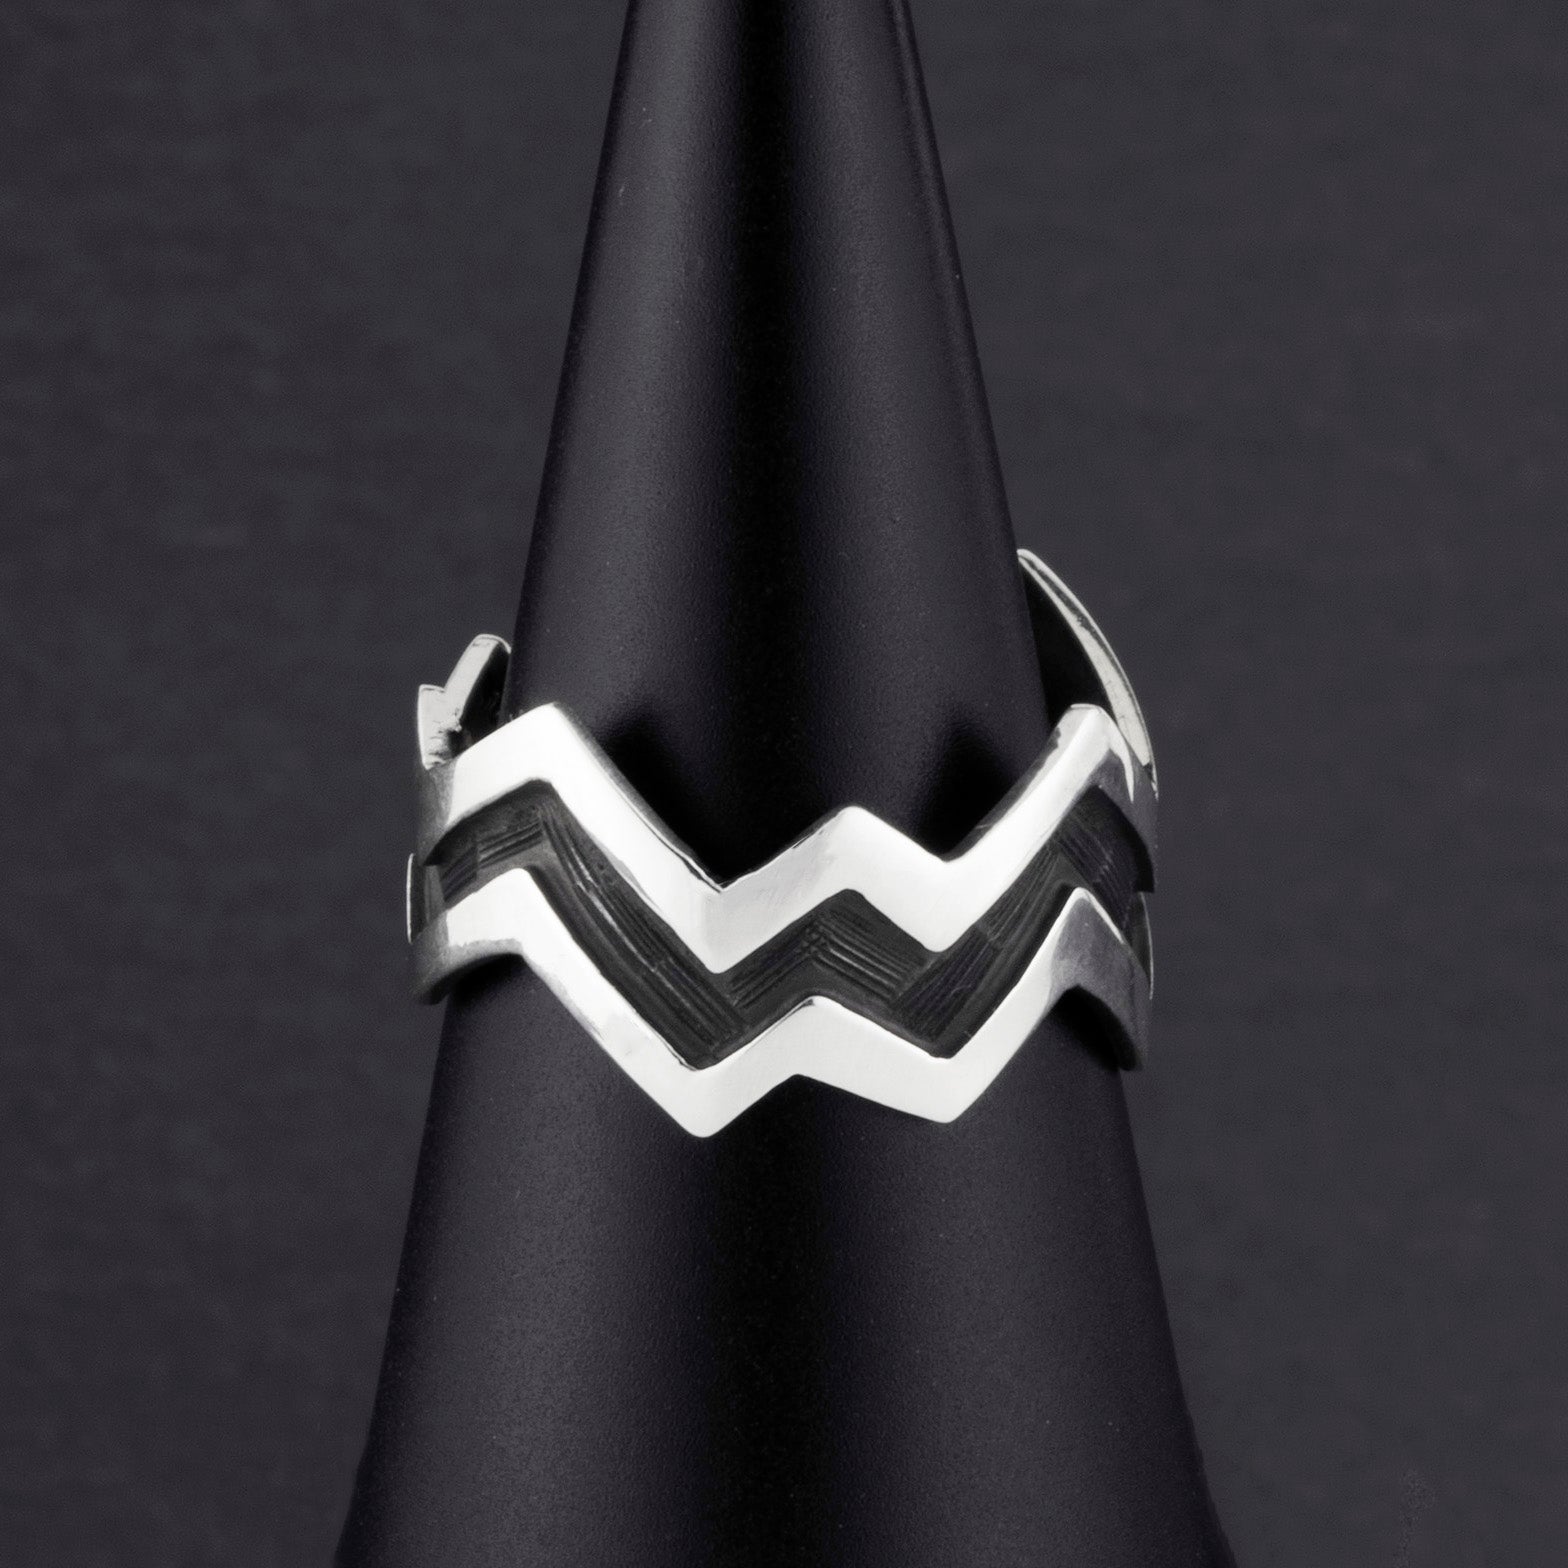 Taxco silver zigzag ring